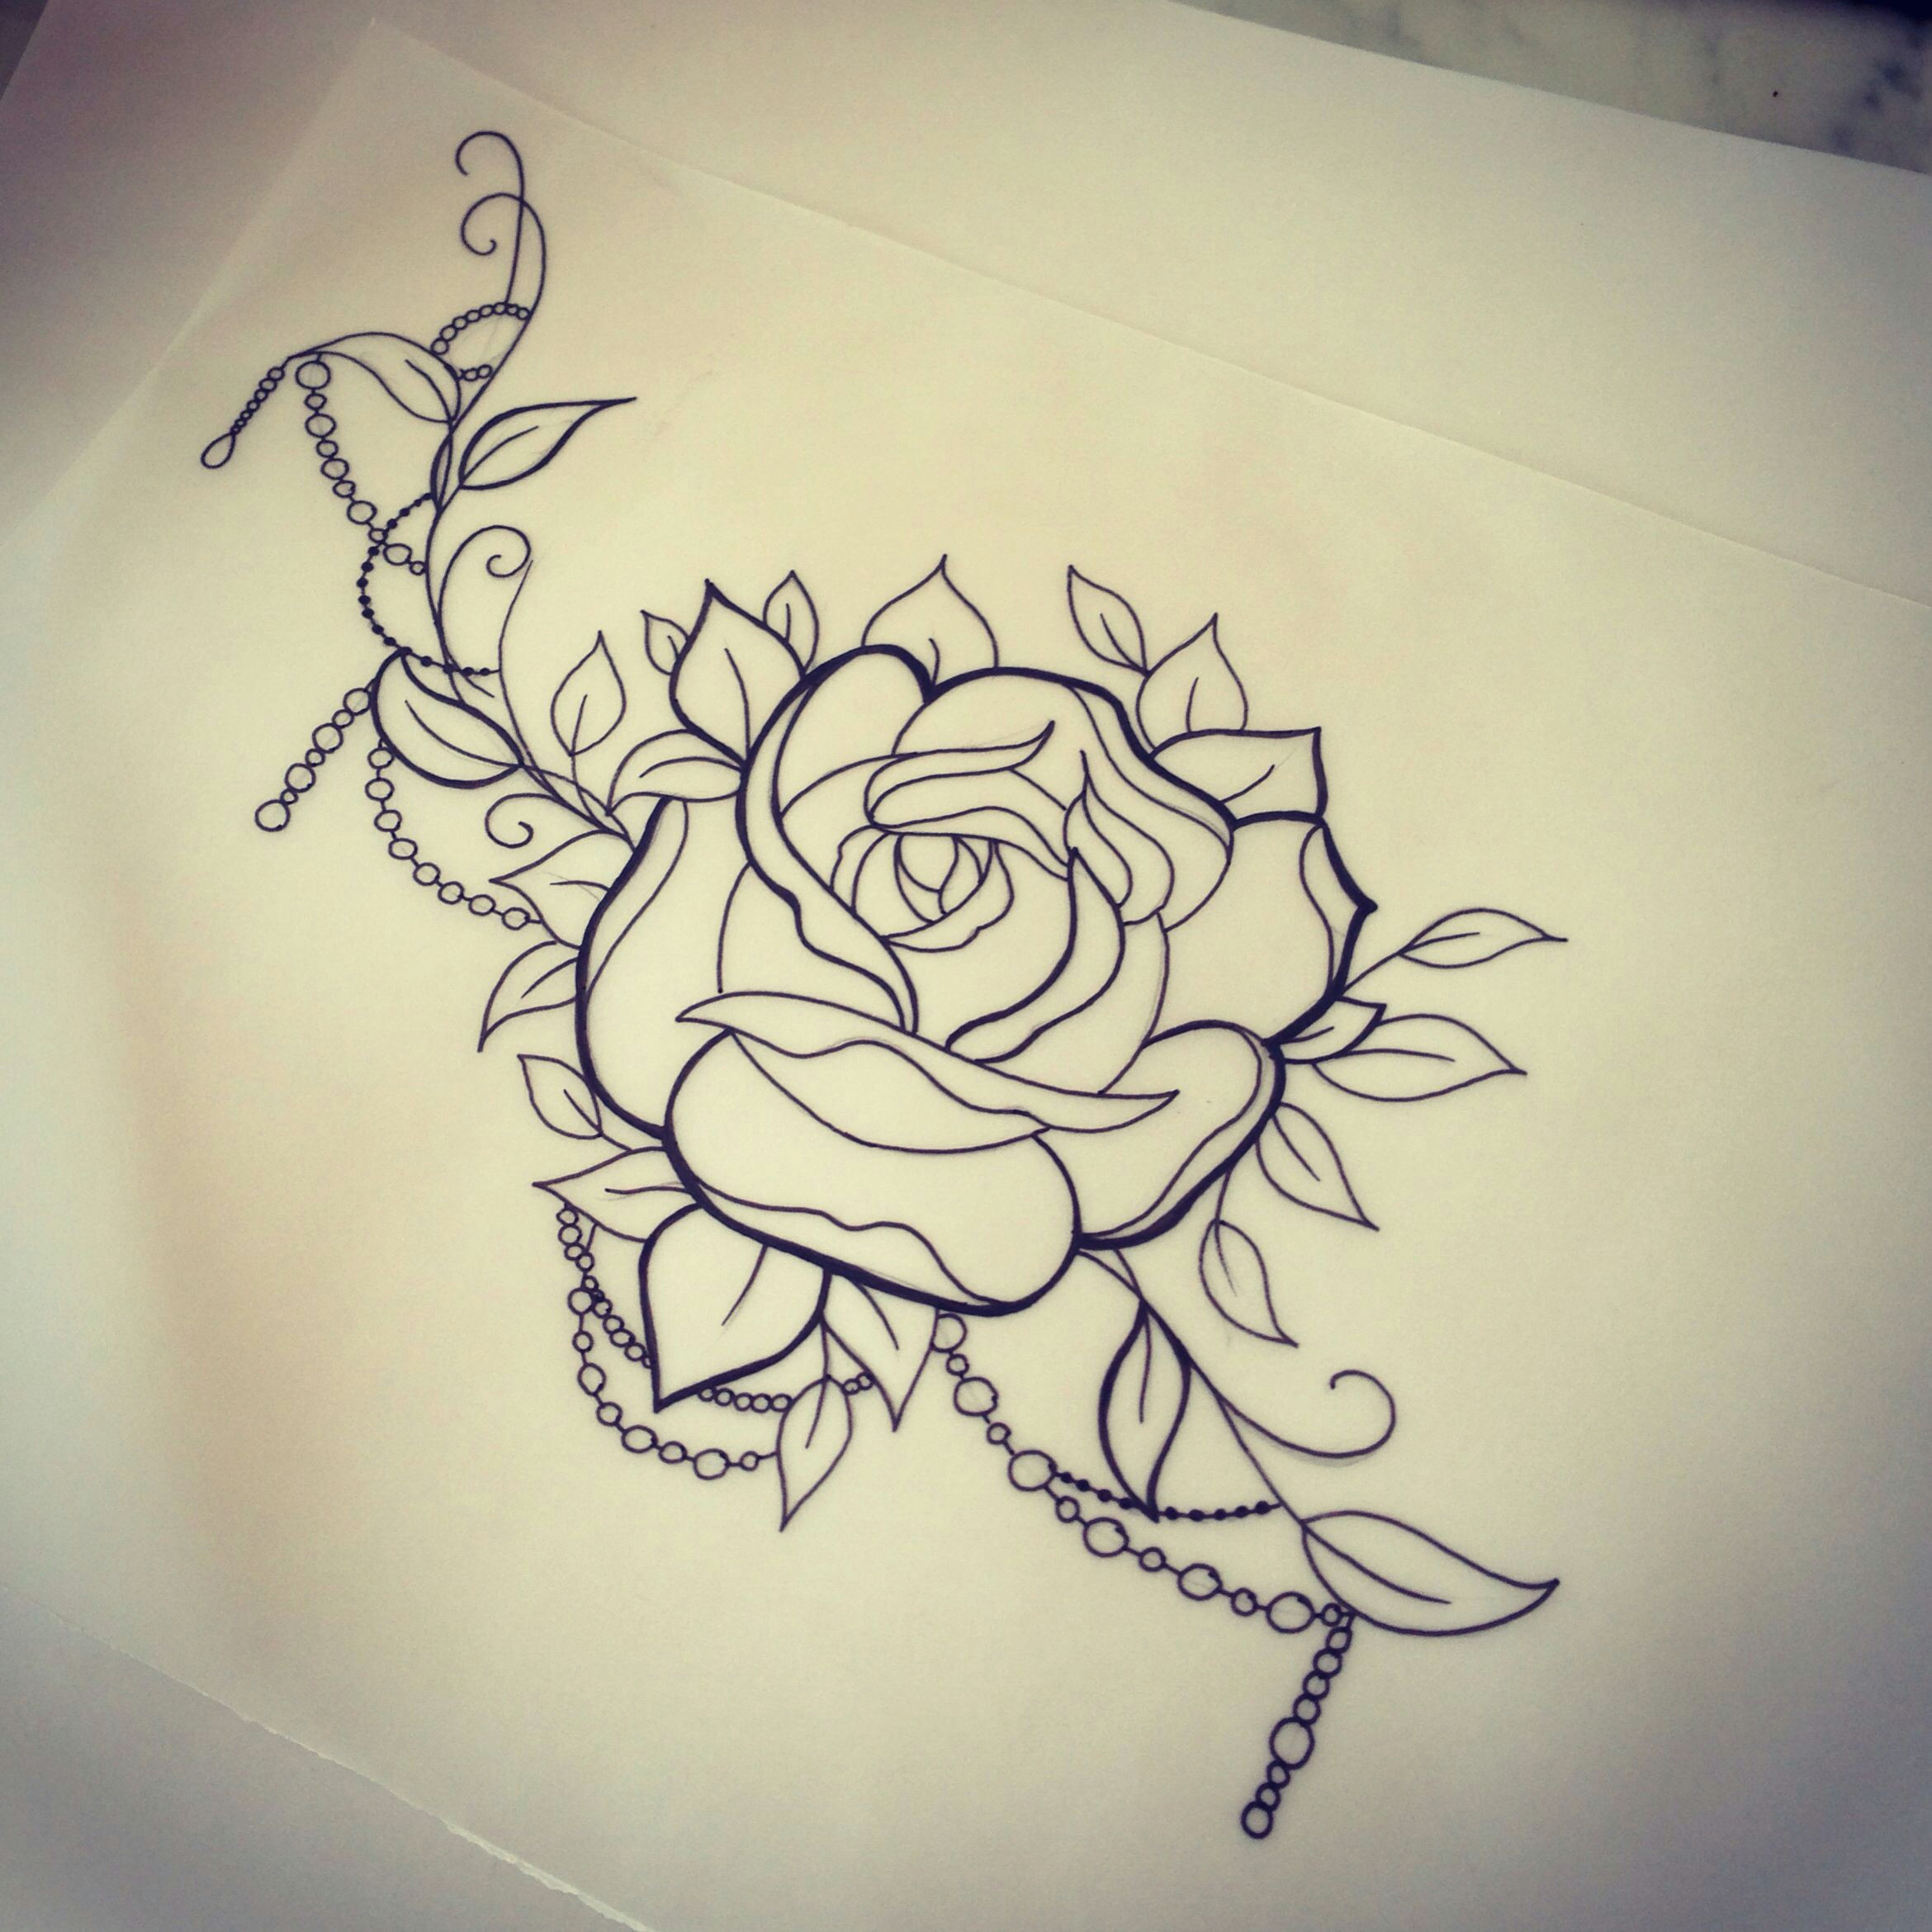 Drawings Of Roses Tattoos Rose and Beads Tattoo Pinterest Tattoos Rose Tattoos and